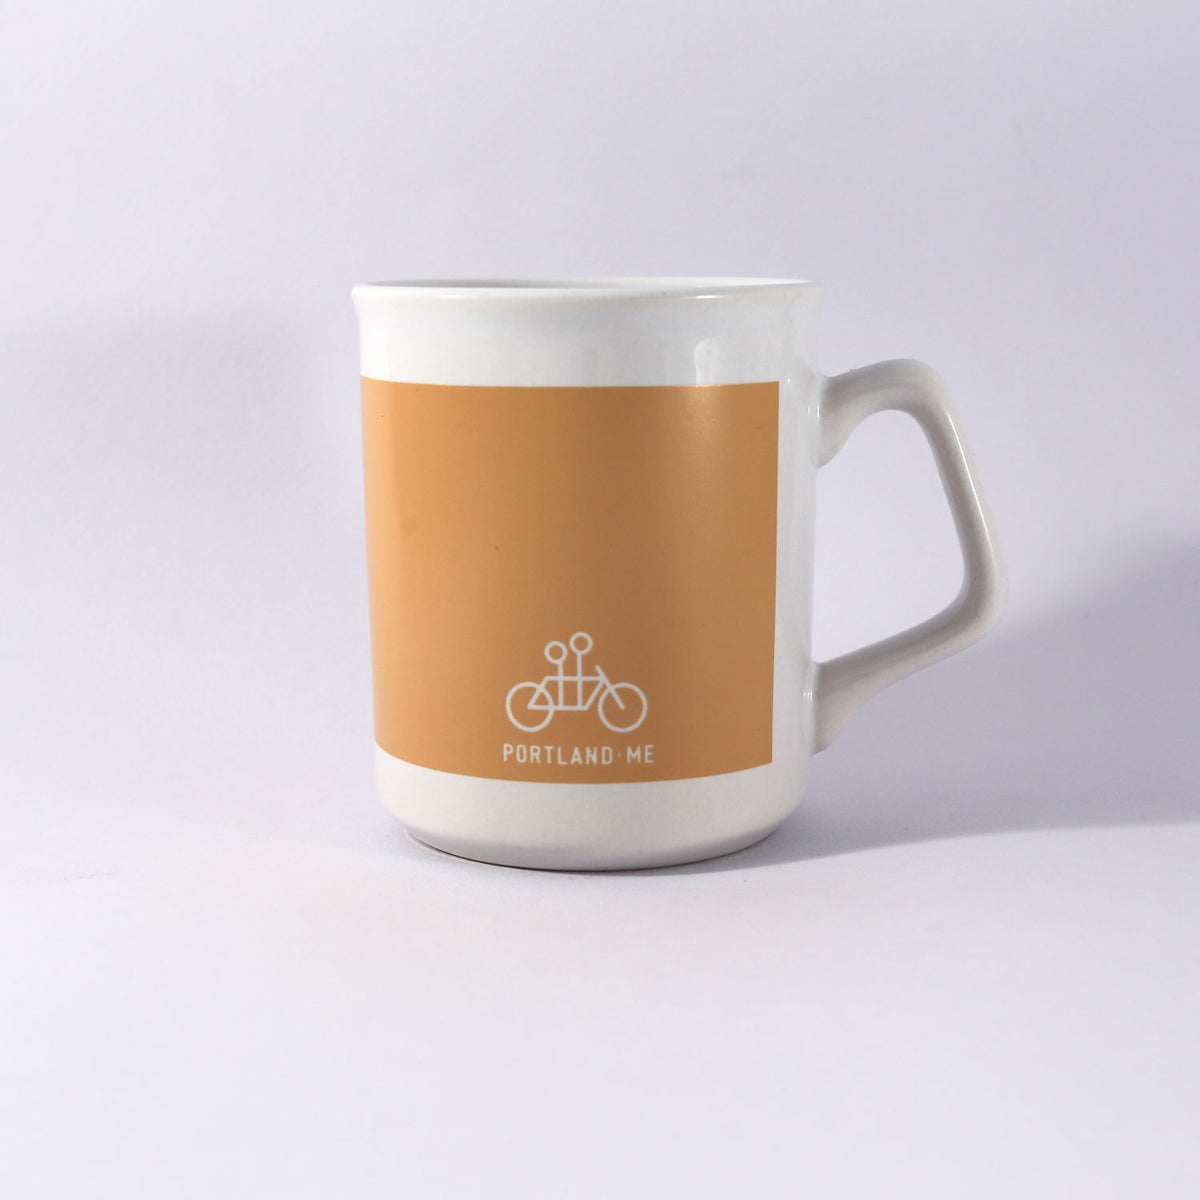 A Kathy Heideman Spread Joy Mug by Tandem Coffee Roasters with a beige top, white bottom, and a bicycle logo marked "Portland - ME" on a light gray background. Handwash recommended.